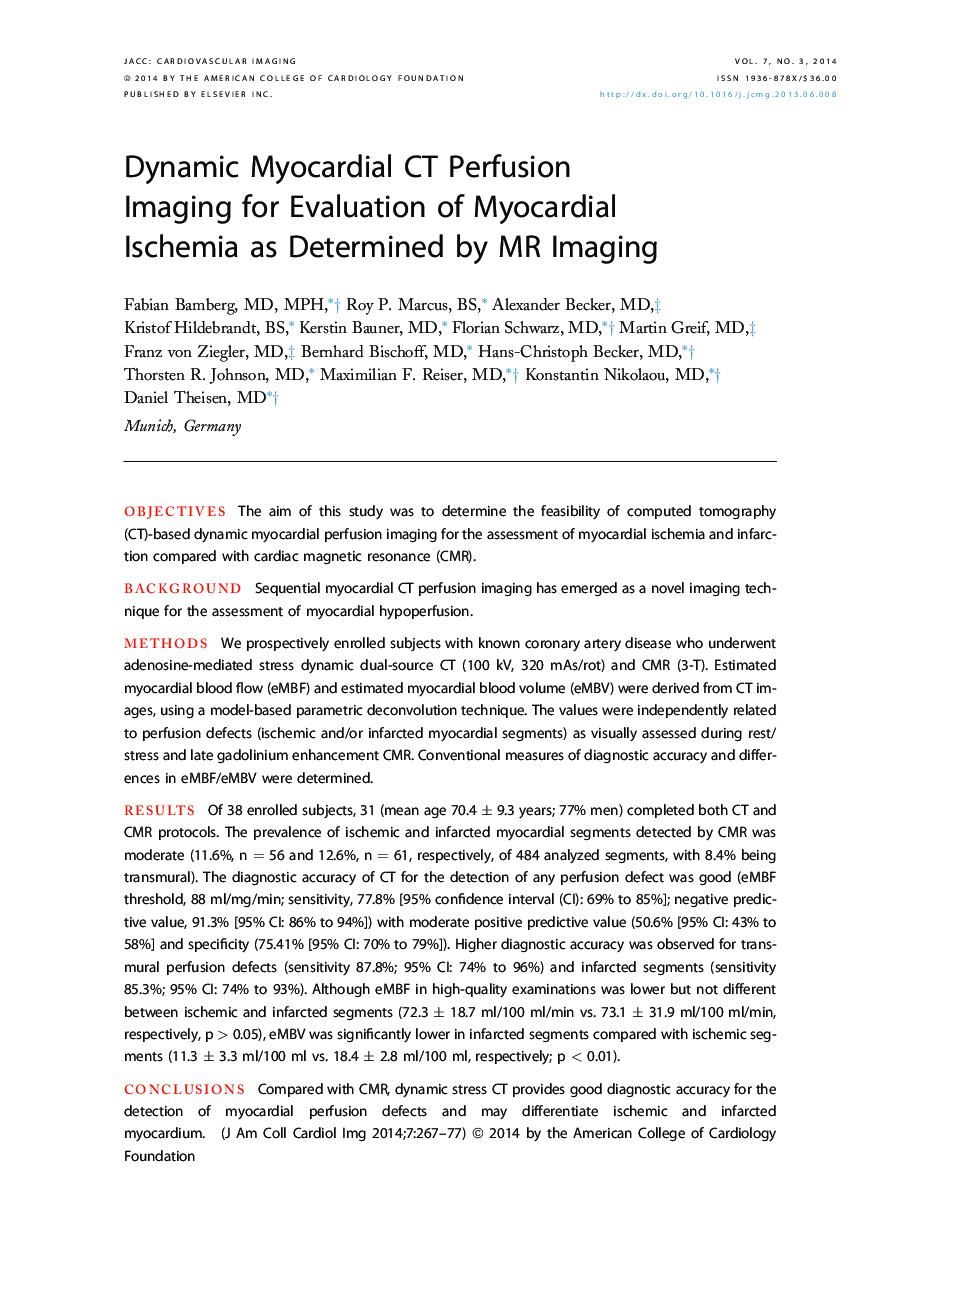 Dynamic Myocardial CT Perfusion Imaging for Evaluation of Myocardial Ischemia as Determined by MR Imaging 